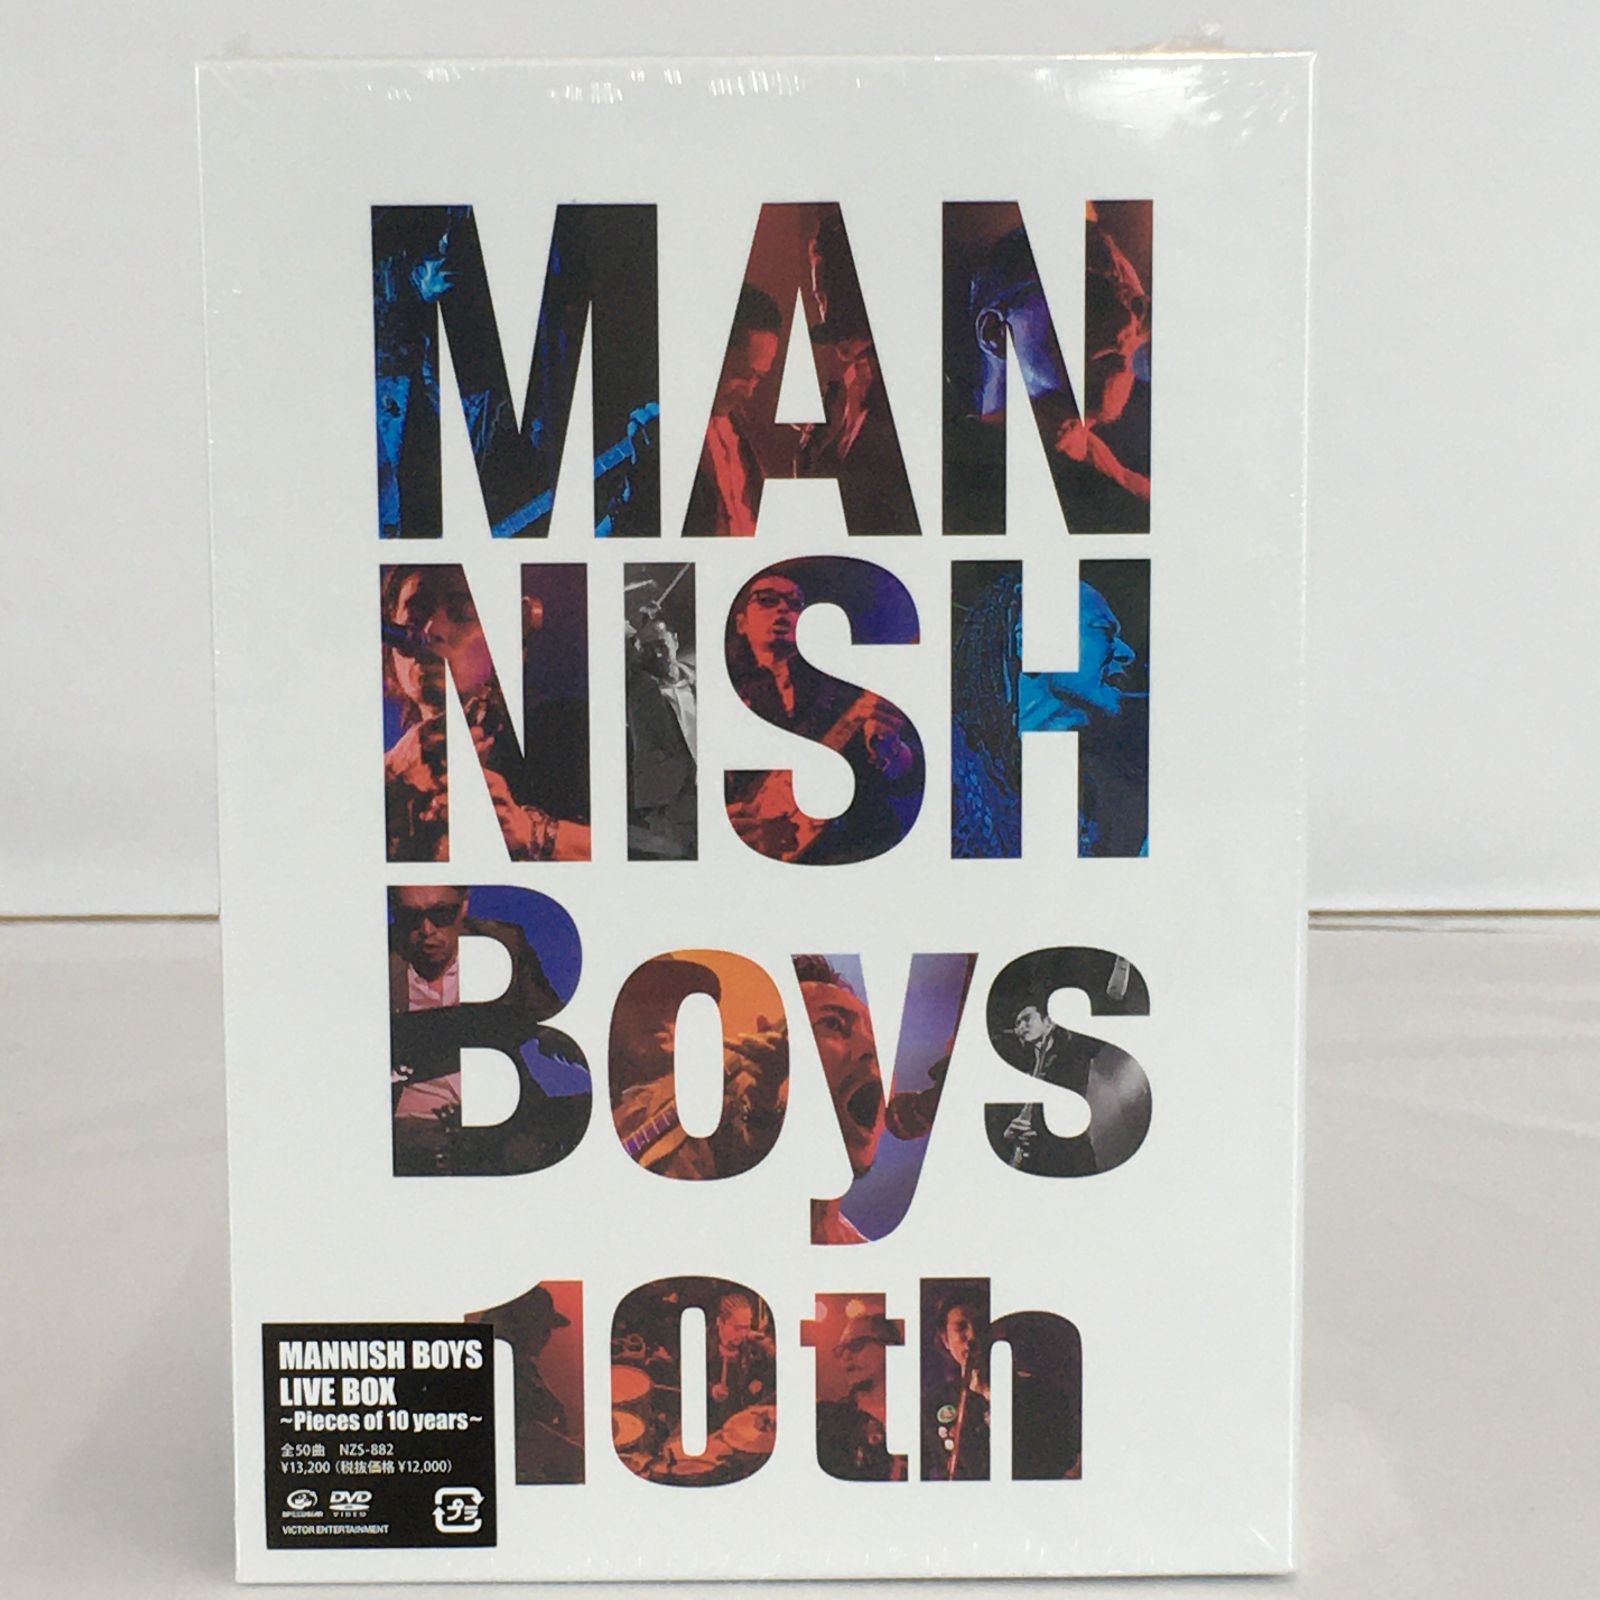 DVD MANNISH BOYS LIVE BOX 〜Pieces of 10 years〜 00080hi◇22 